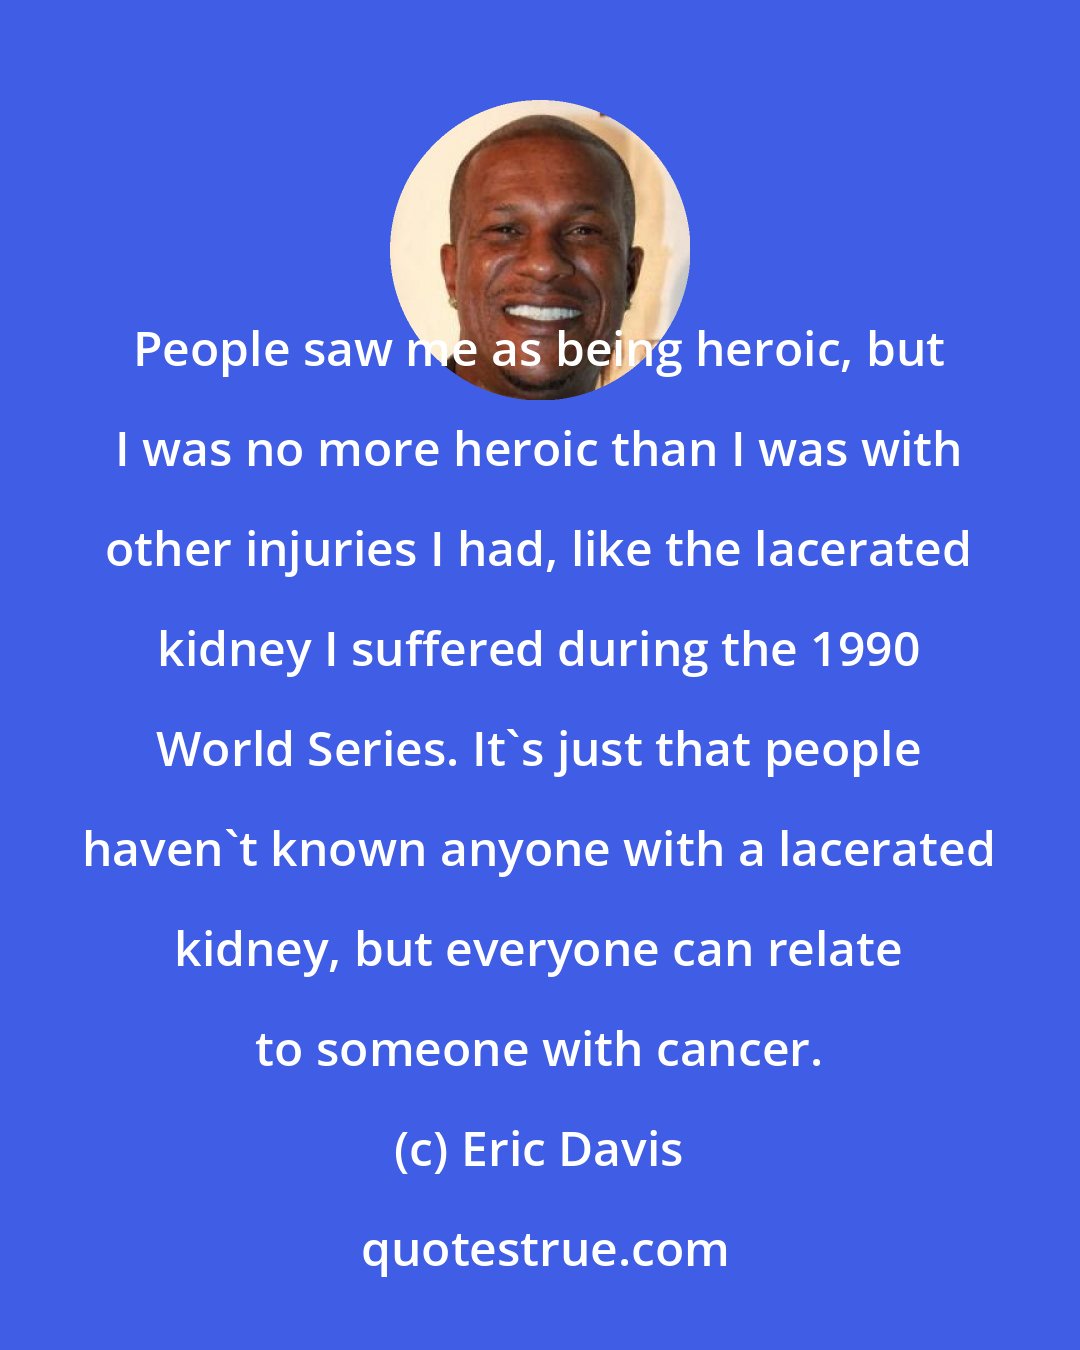 Eric Davis: People saw me as being heroic, but I was no more heroic than I was with other injuries I had, like the lacerated kidney I suffered during the 1990 World Series. It's just that people haven't known anyone with a lacerated kidney, but everyone can relate to someone with cancer.